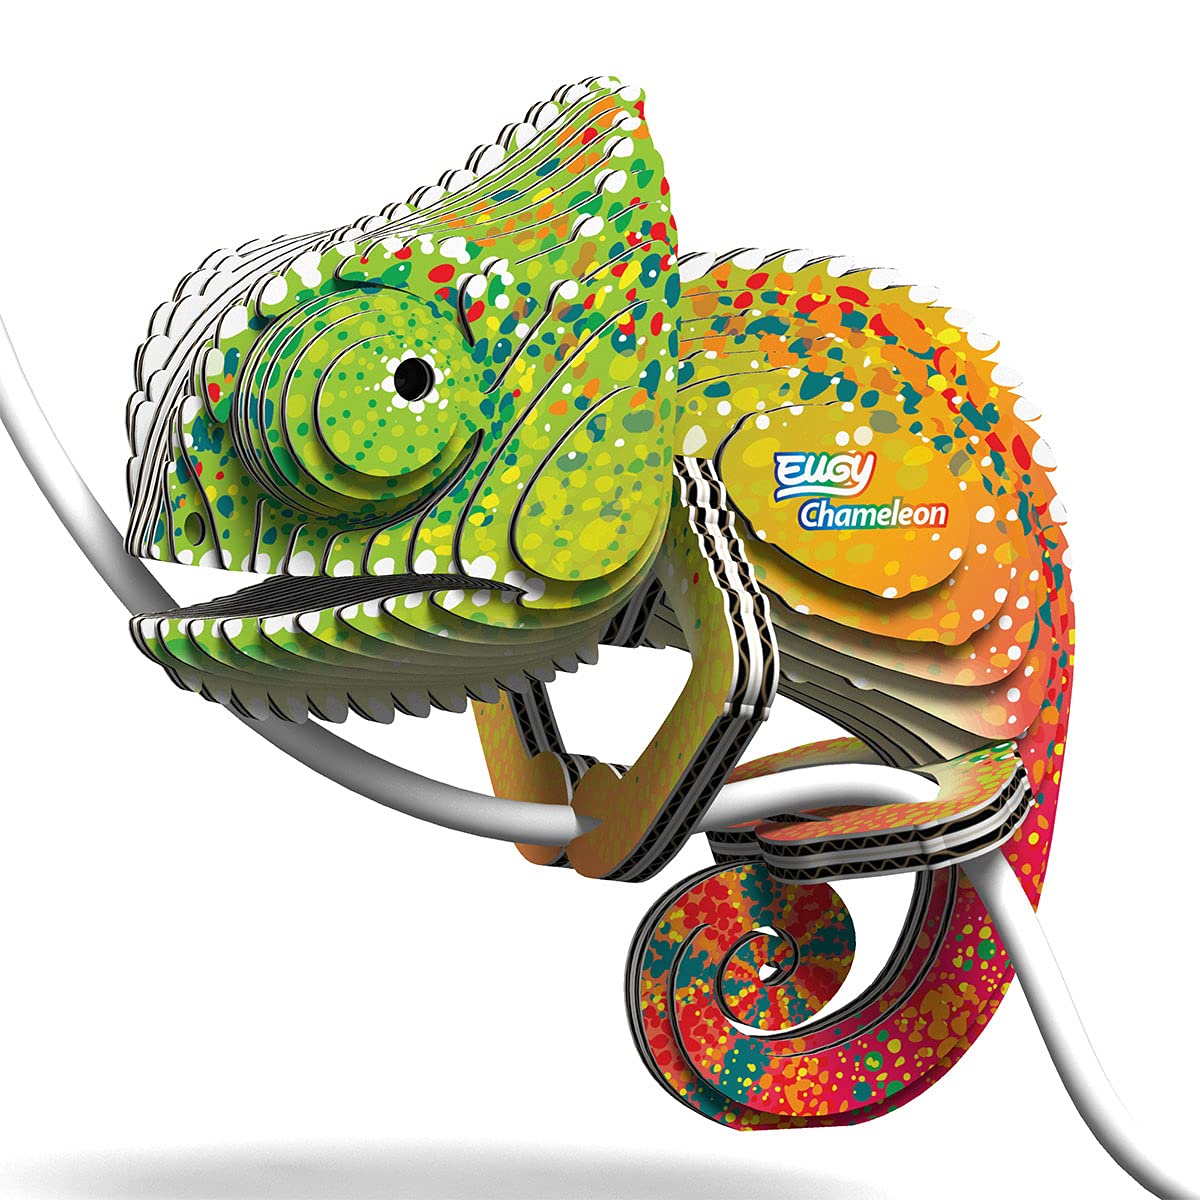 Eugy Chameleon 3D Puzzle, 31 Piece Eco-Friendly Educational Learning Puzzles for Kids 6+